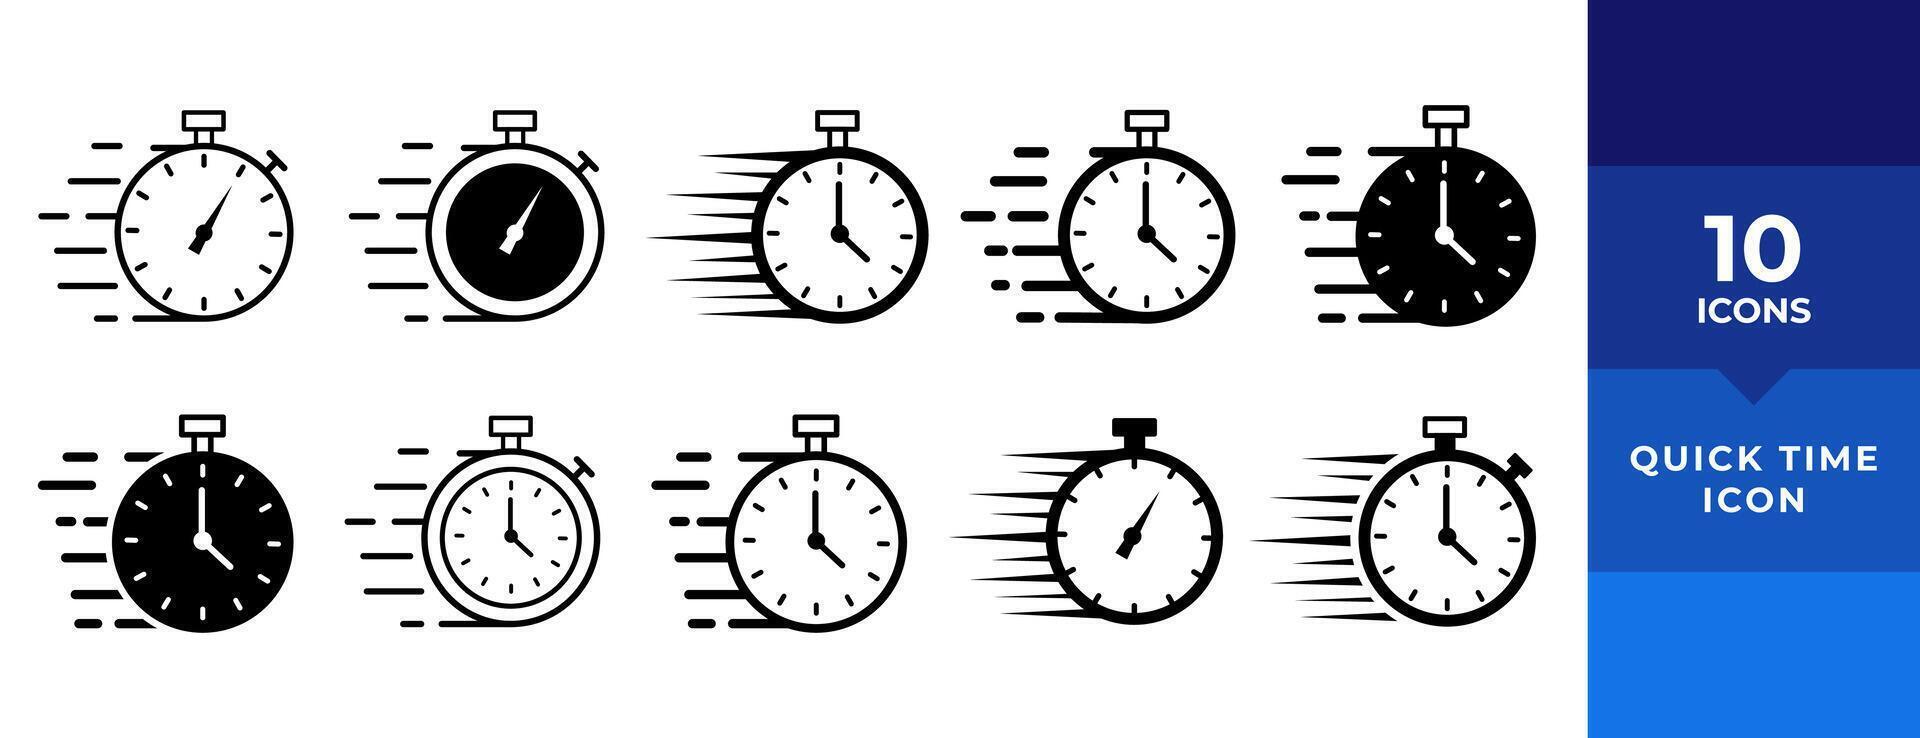 Timer icons set. Quick time or deadline icon. Express service symbol. Countdown timer and stopwatch icons isolated on white. Vector illustration.